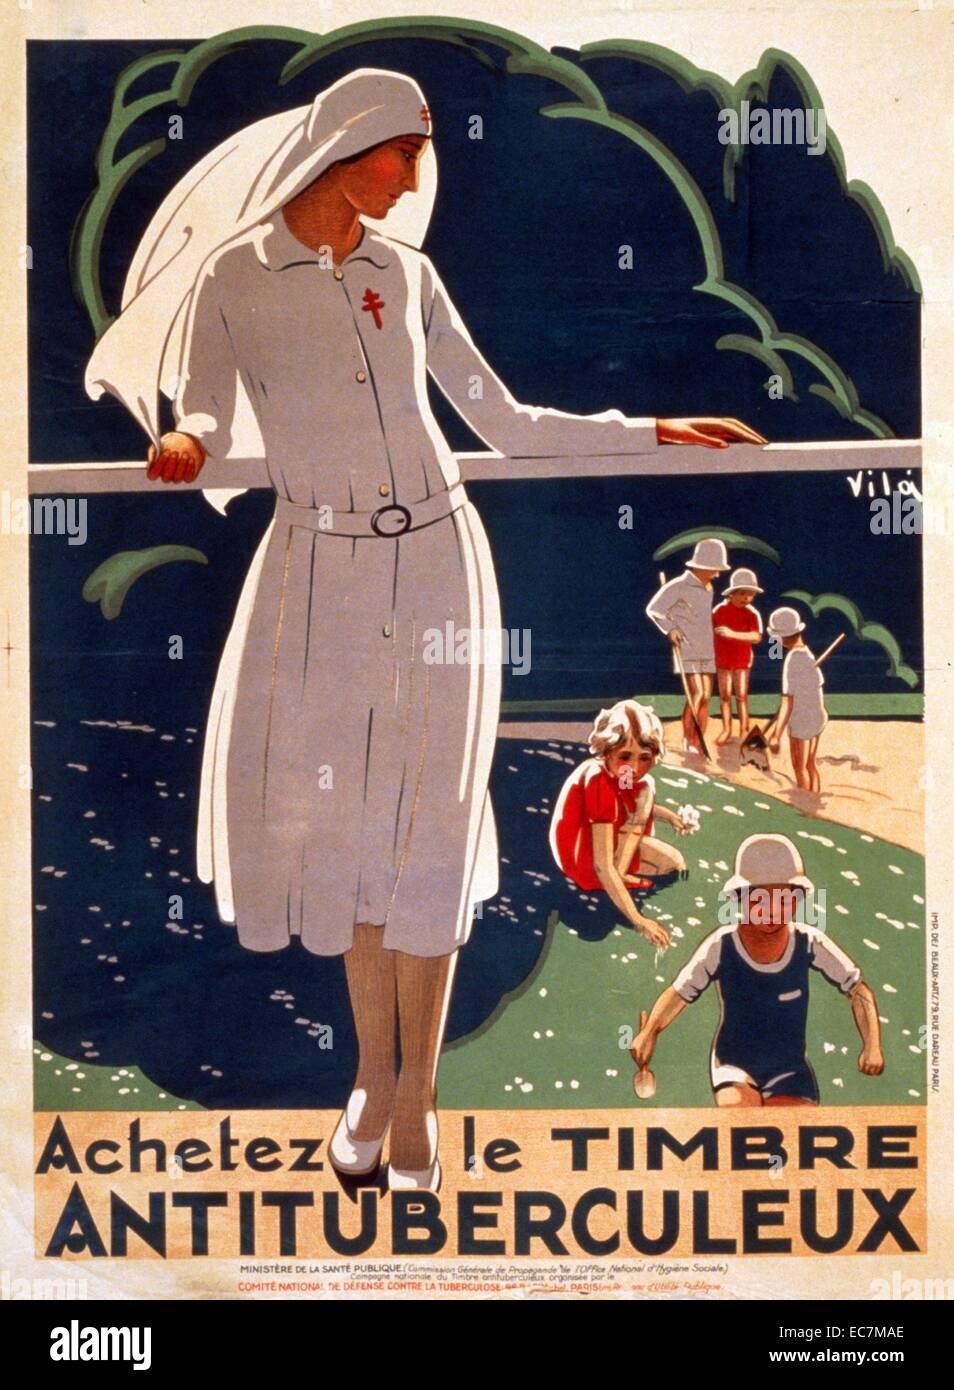 Achetez le timbre antituberculeux - Buy the tuberculosis stamp. A French public health propaganda poster showing a nurse watching children playing outdoors. Stock Photo